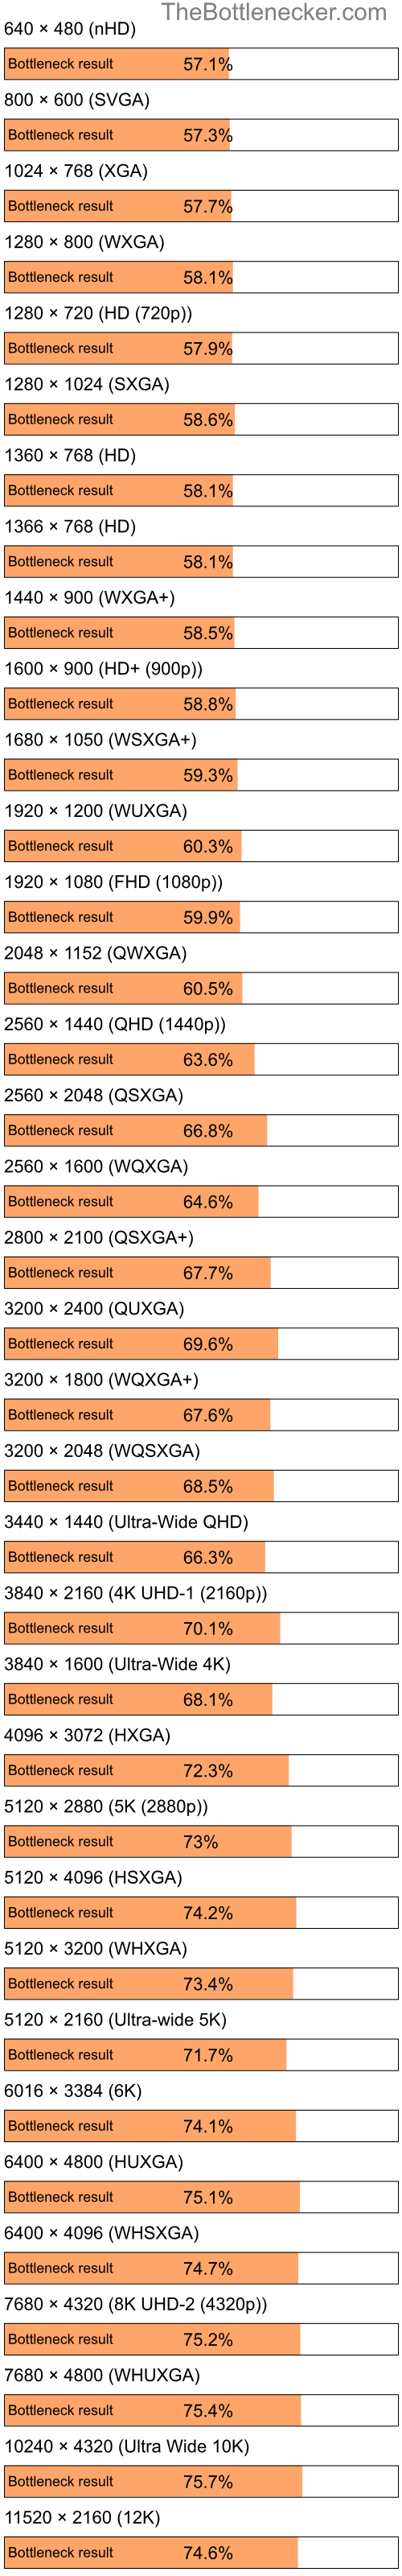 Bottleneck results by resolution for Intel Pentium 4 and NVIDIA Quadro FX 550 in Processor Intense Tasks